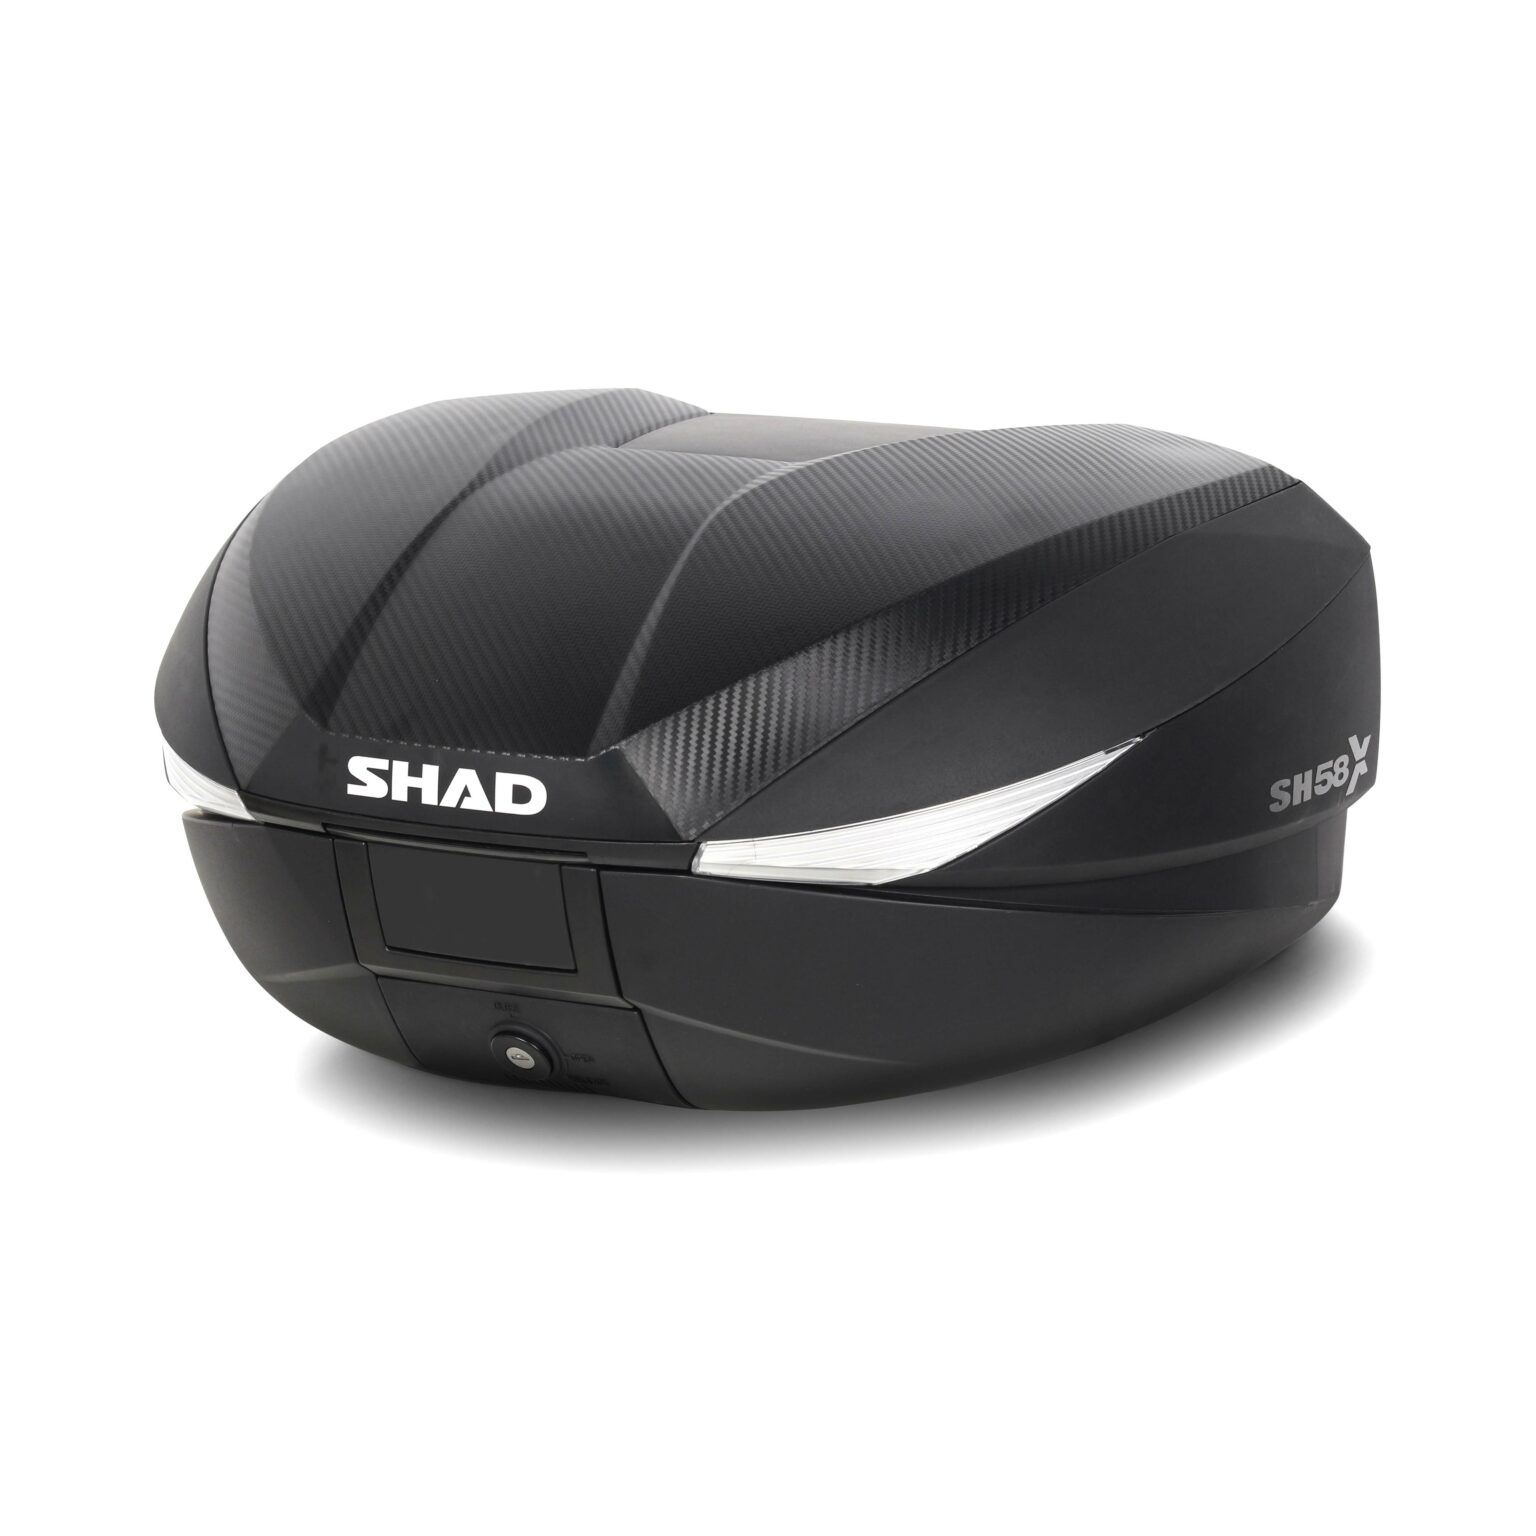 Pioneers expandability - SHAD